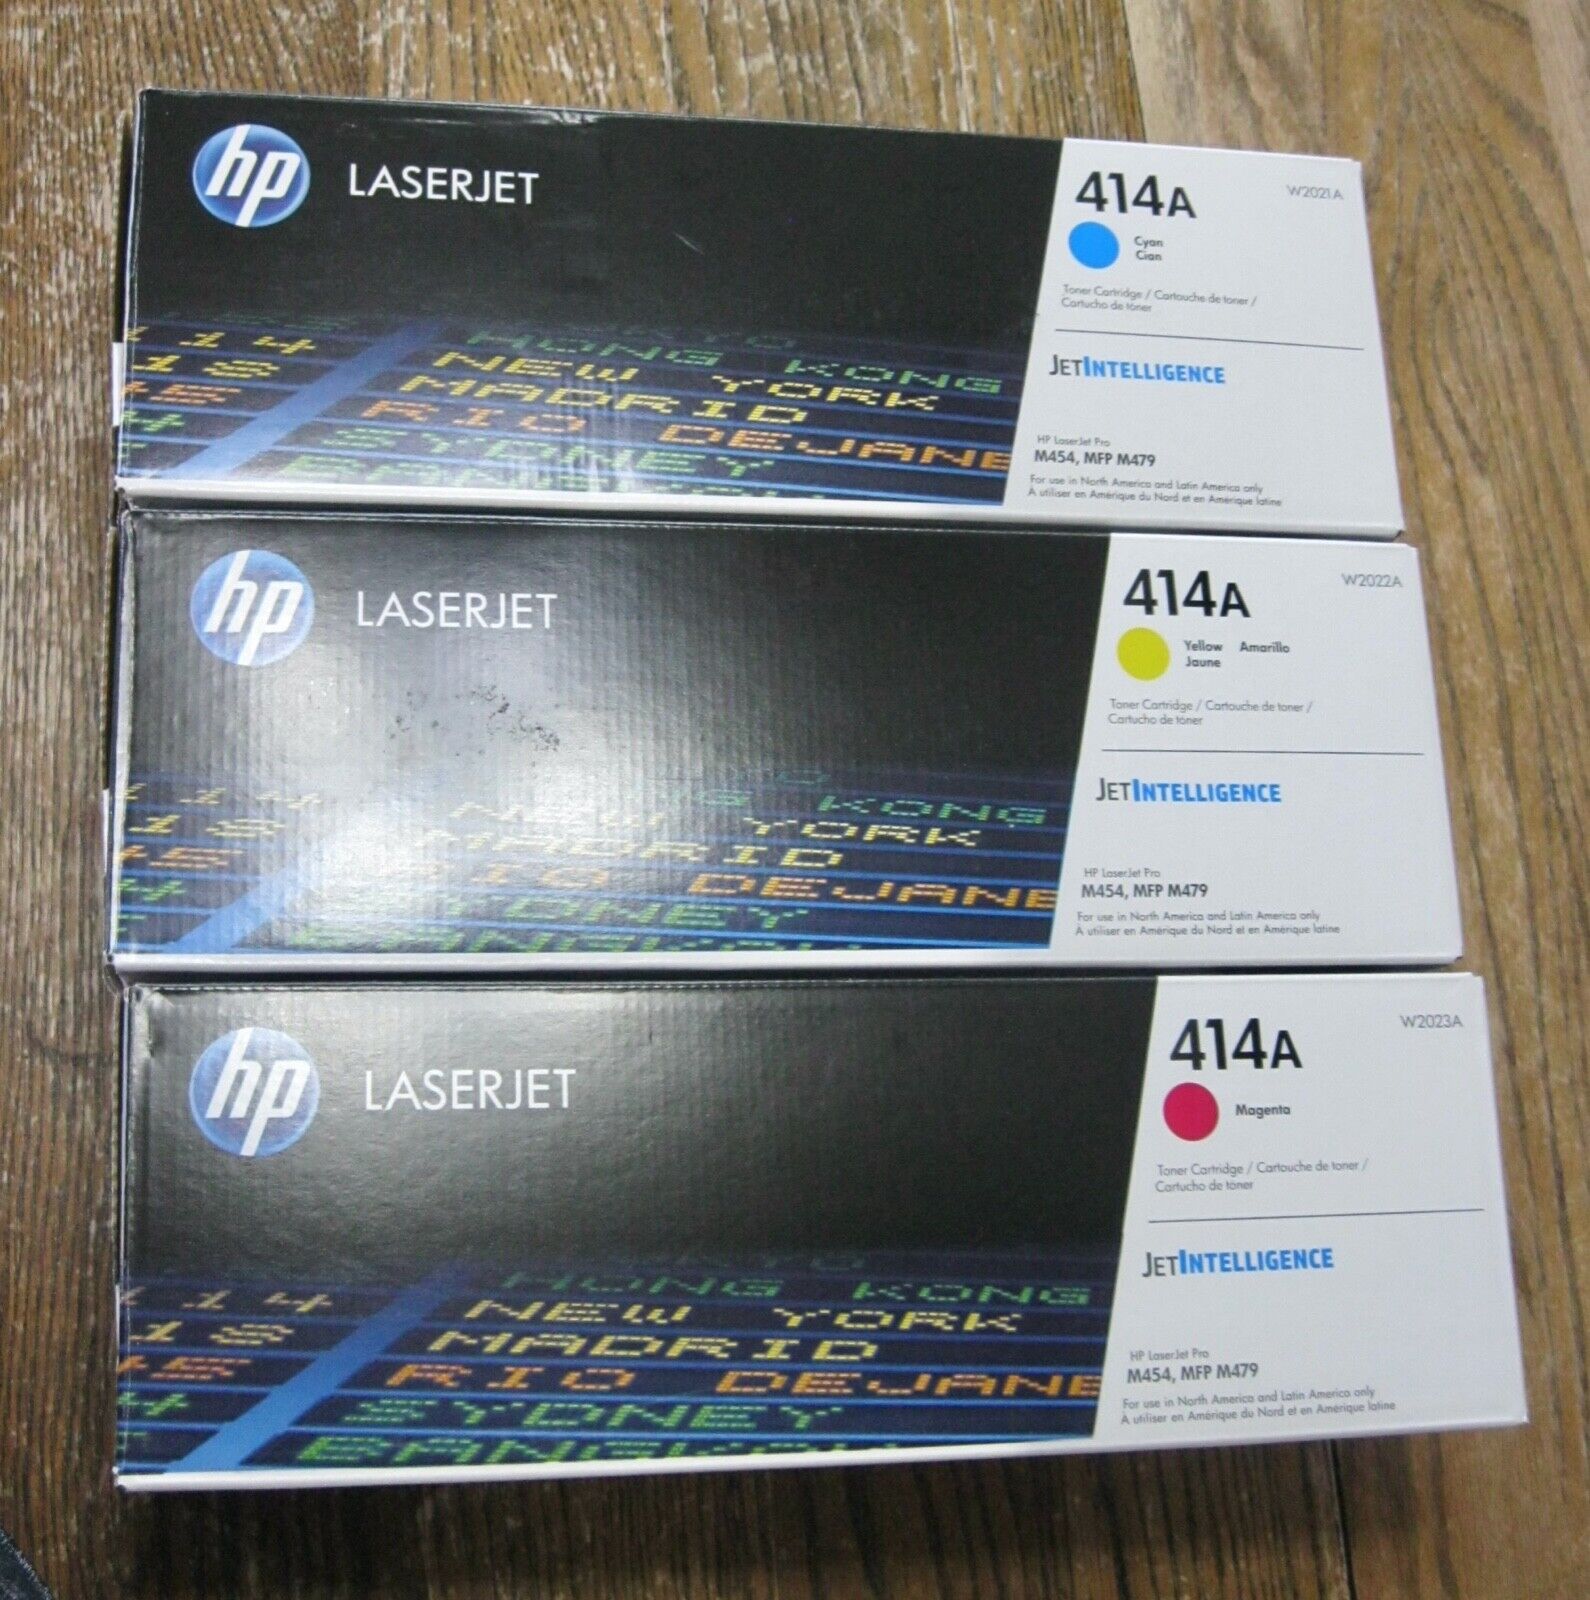 3 Empty Virgin Used Oem Hp Toner Cartridges 414 A With Chips Laser Jet W2022a